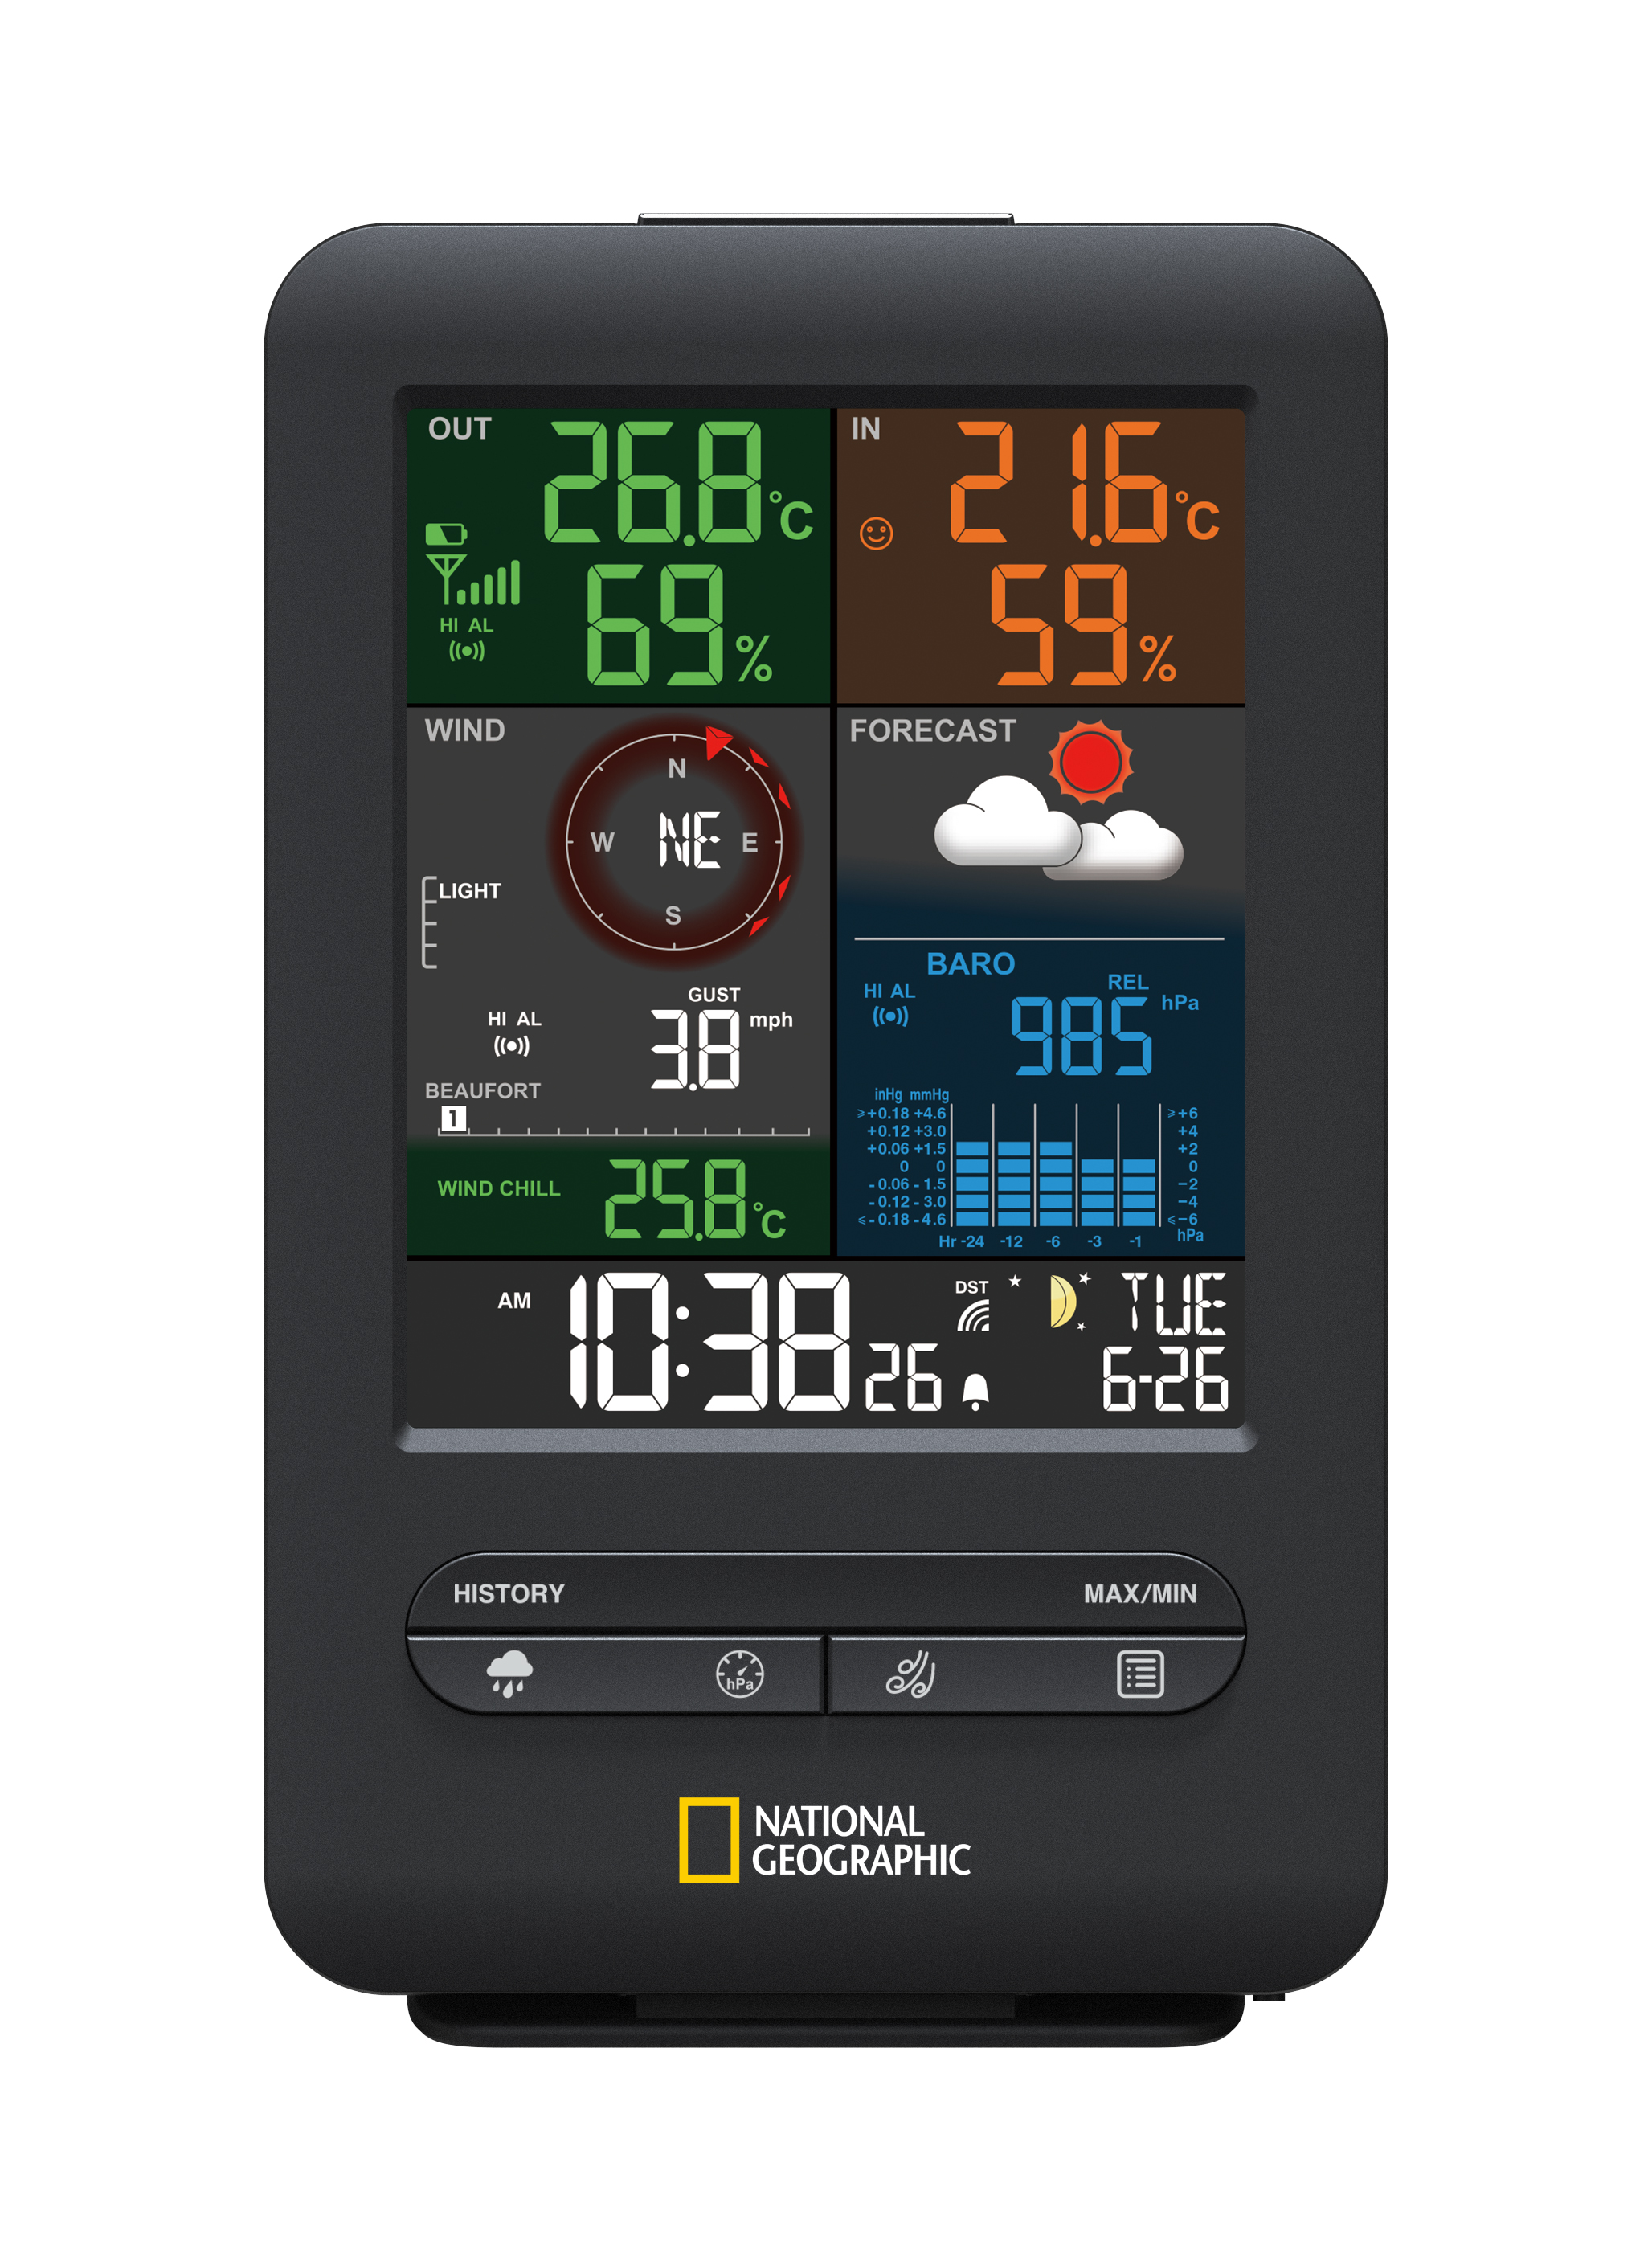 NATIONAL GEOGRAPHIC 256-Color and RC Weather Station 5-in-1